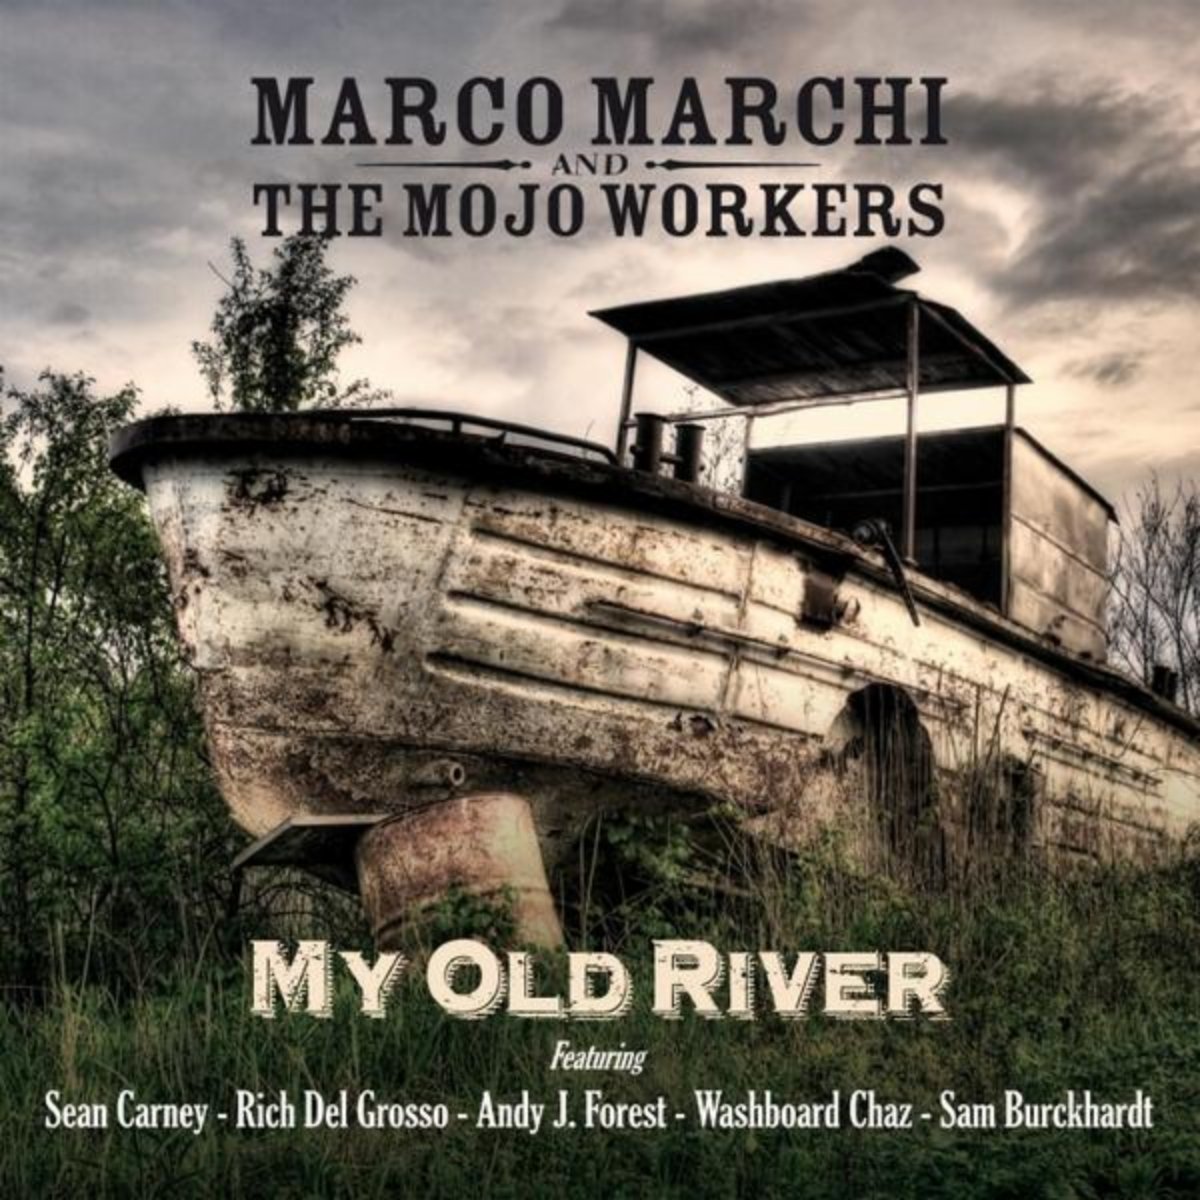 Marco Marchi & the Mojo Workers – My Old River (2012) [FLAC]